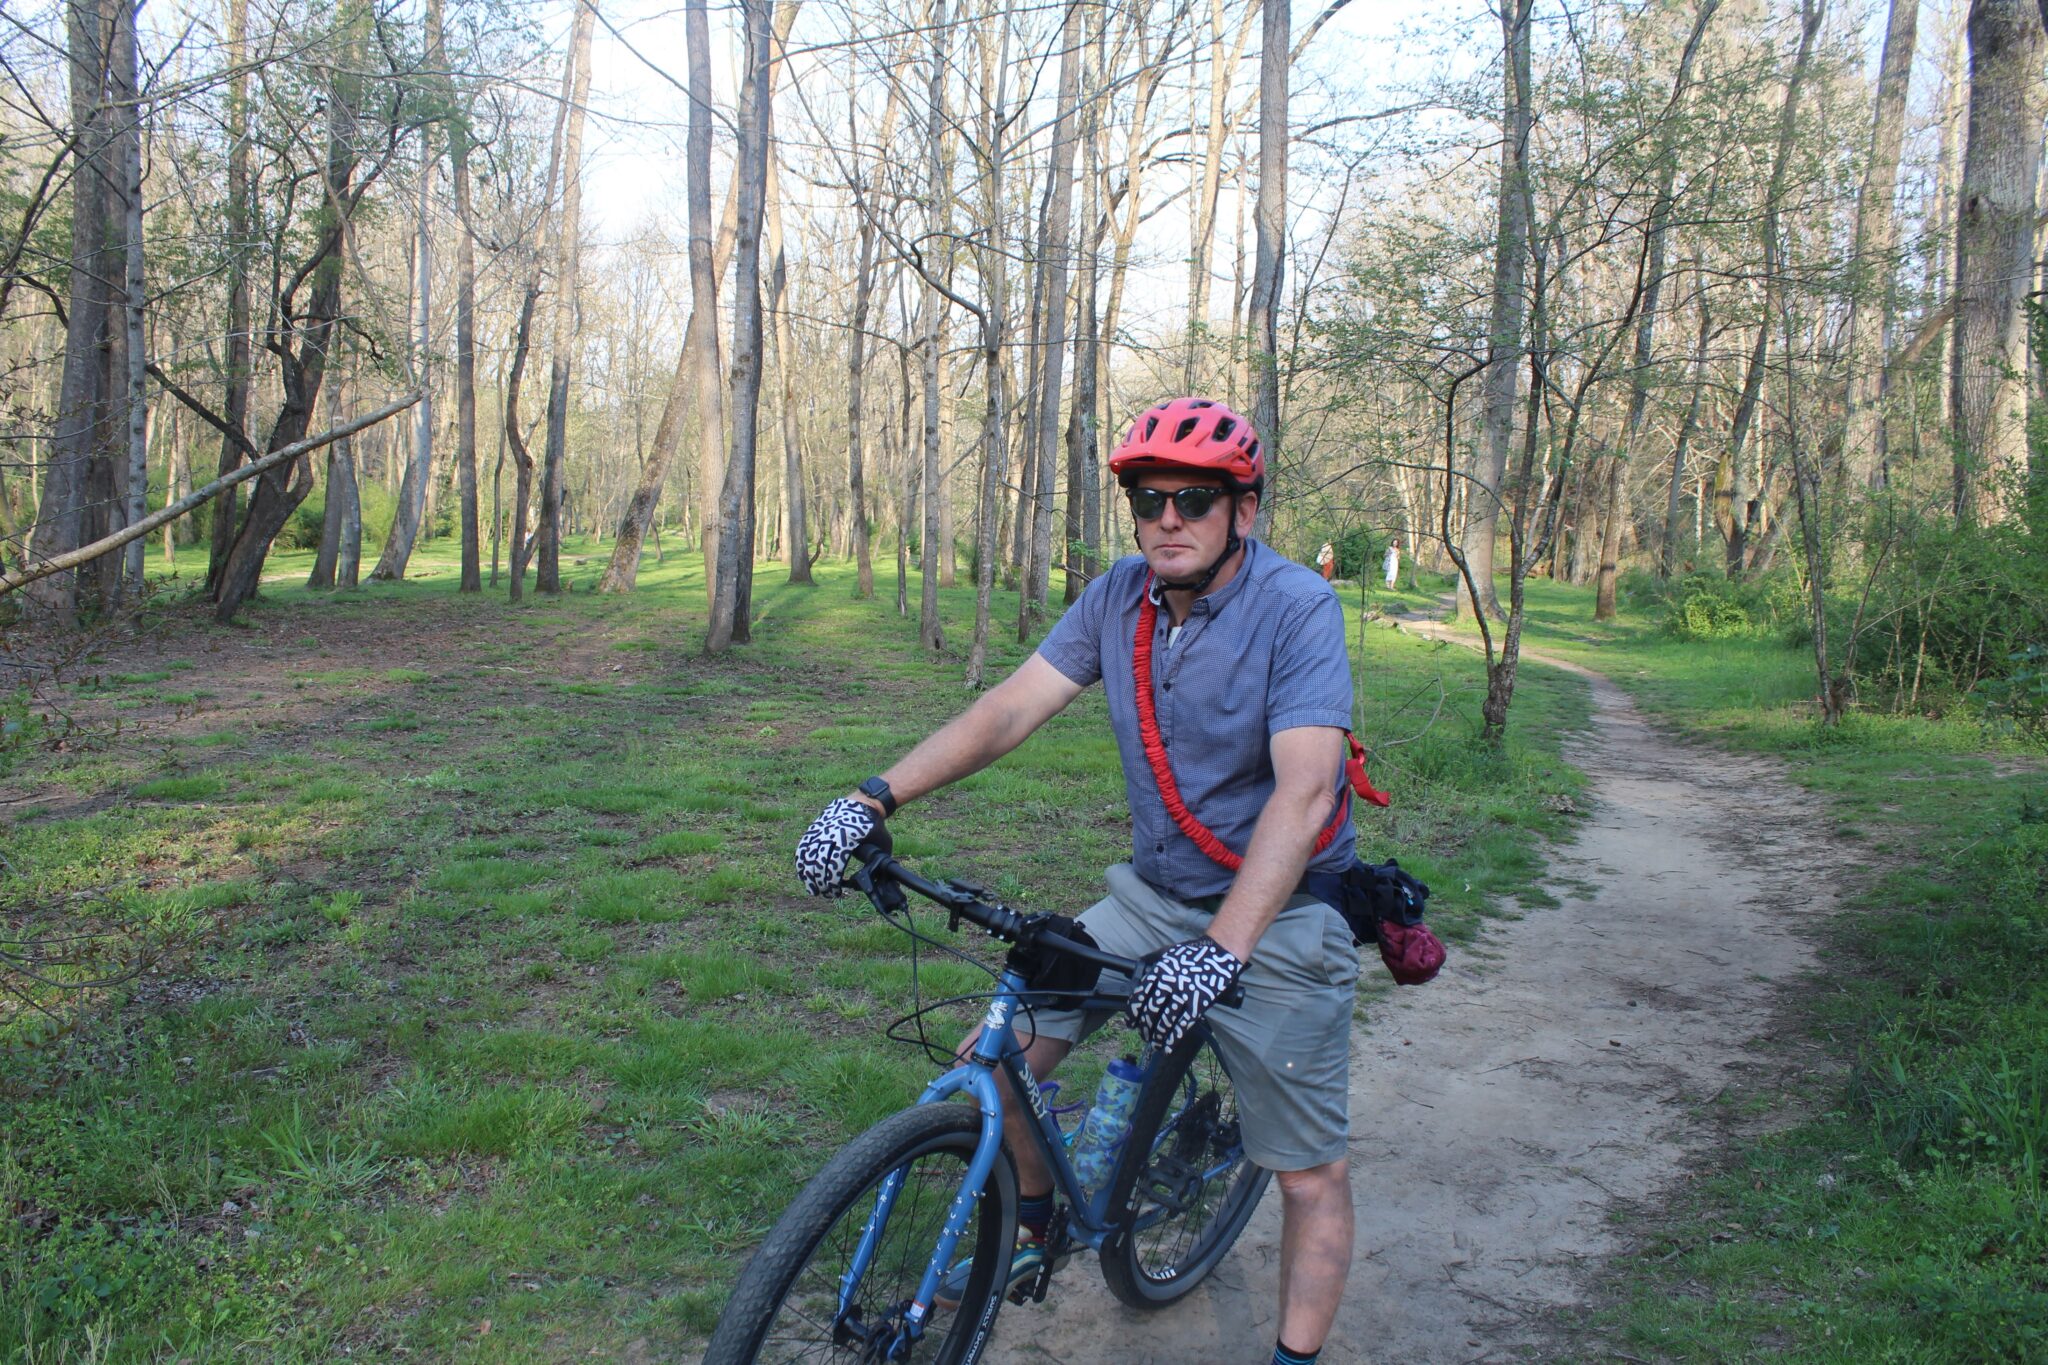 Asheville Unpaved initiative aims to create inner-city system of natural surface biking trails